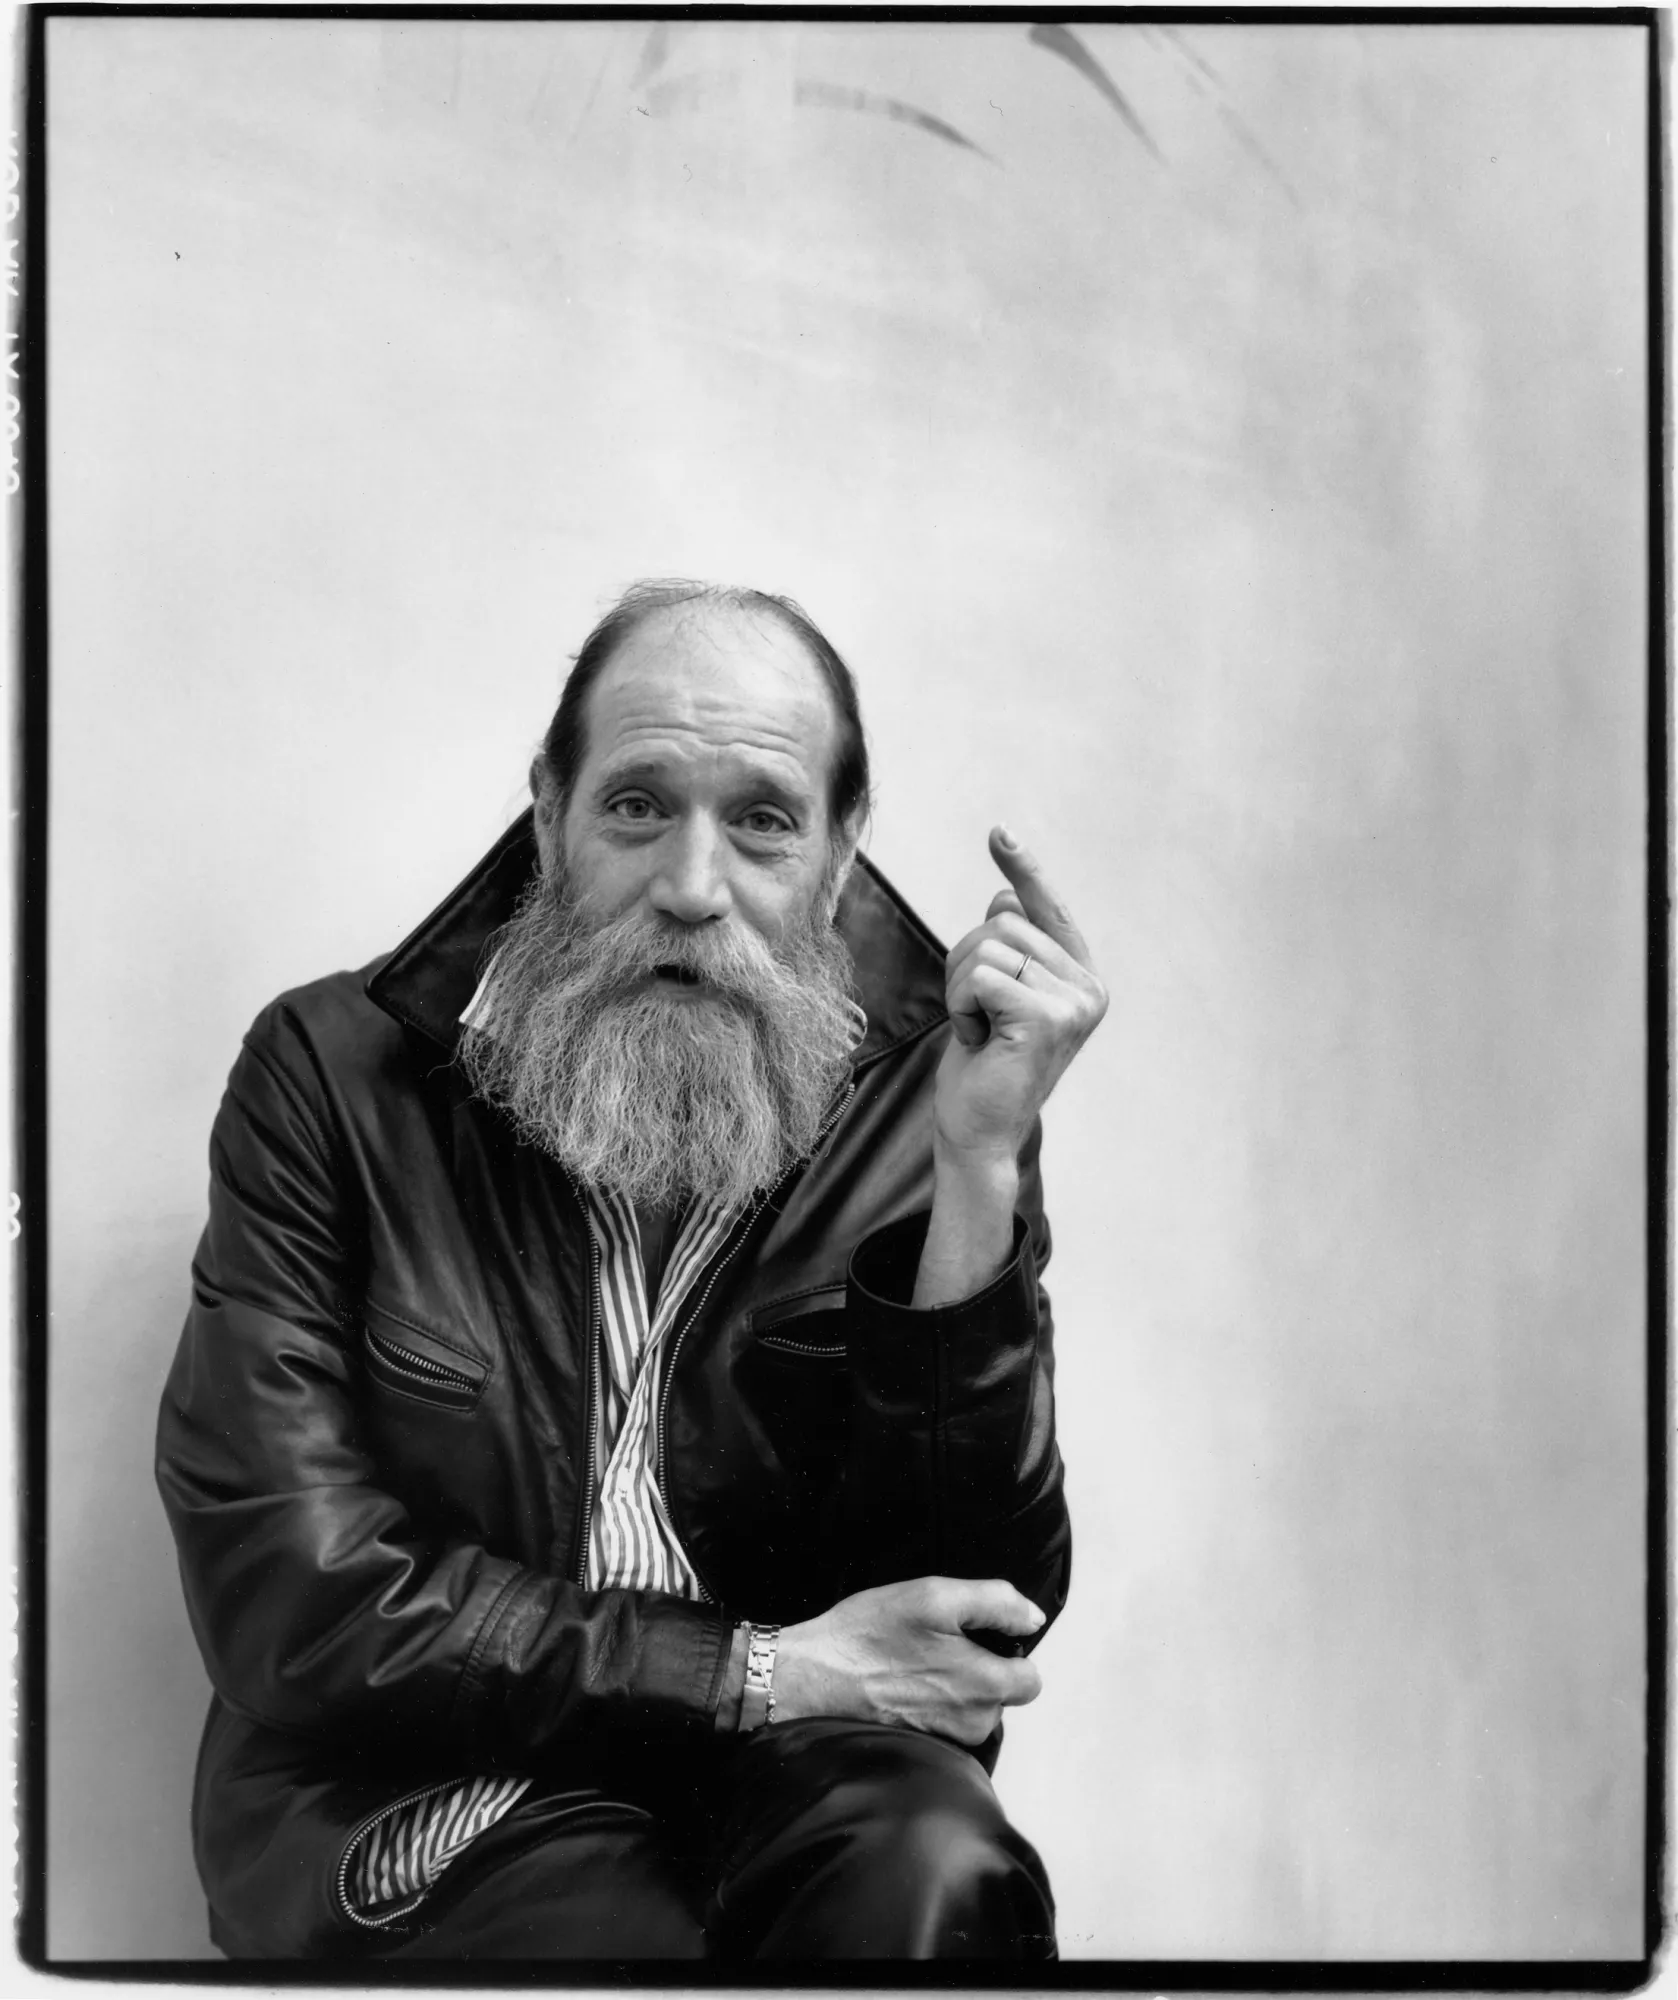 Gladstone Gallery Adds the Estate of Lawrence Weiner in New York